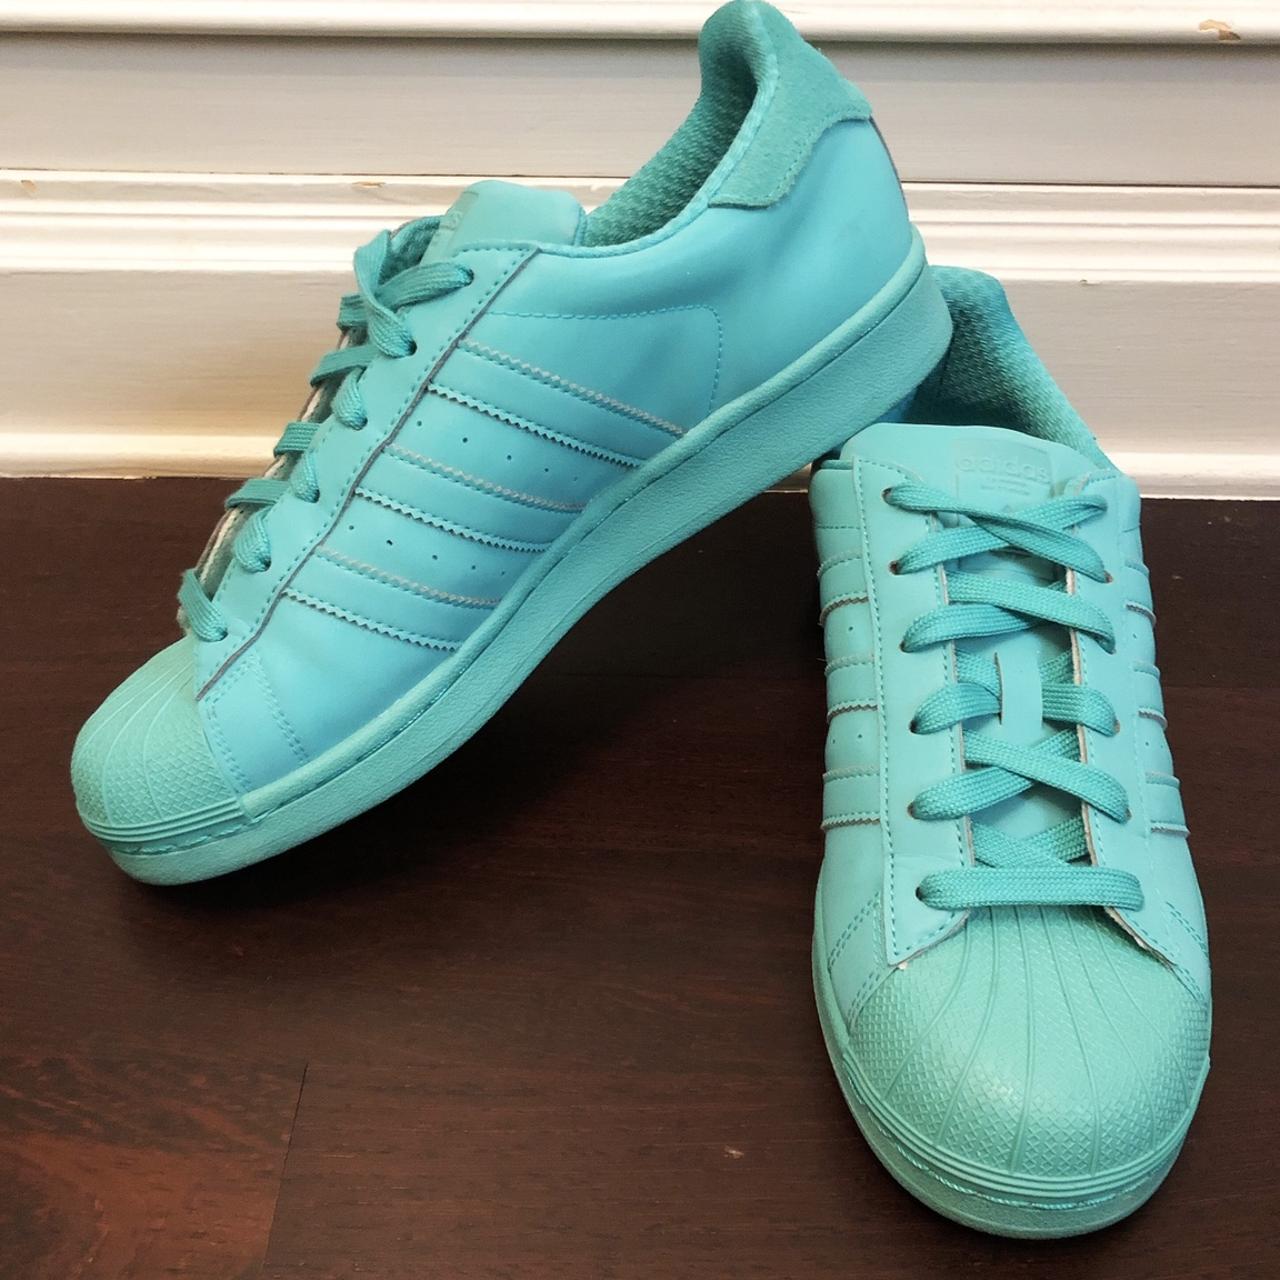 Adidas Superstar color Teal (turchese) in... -